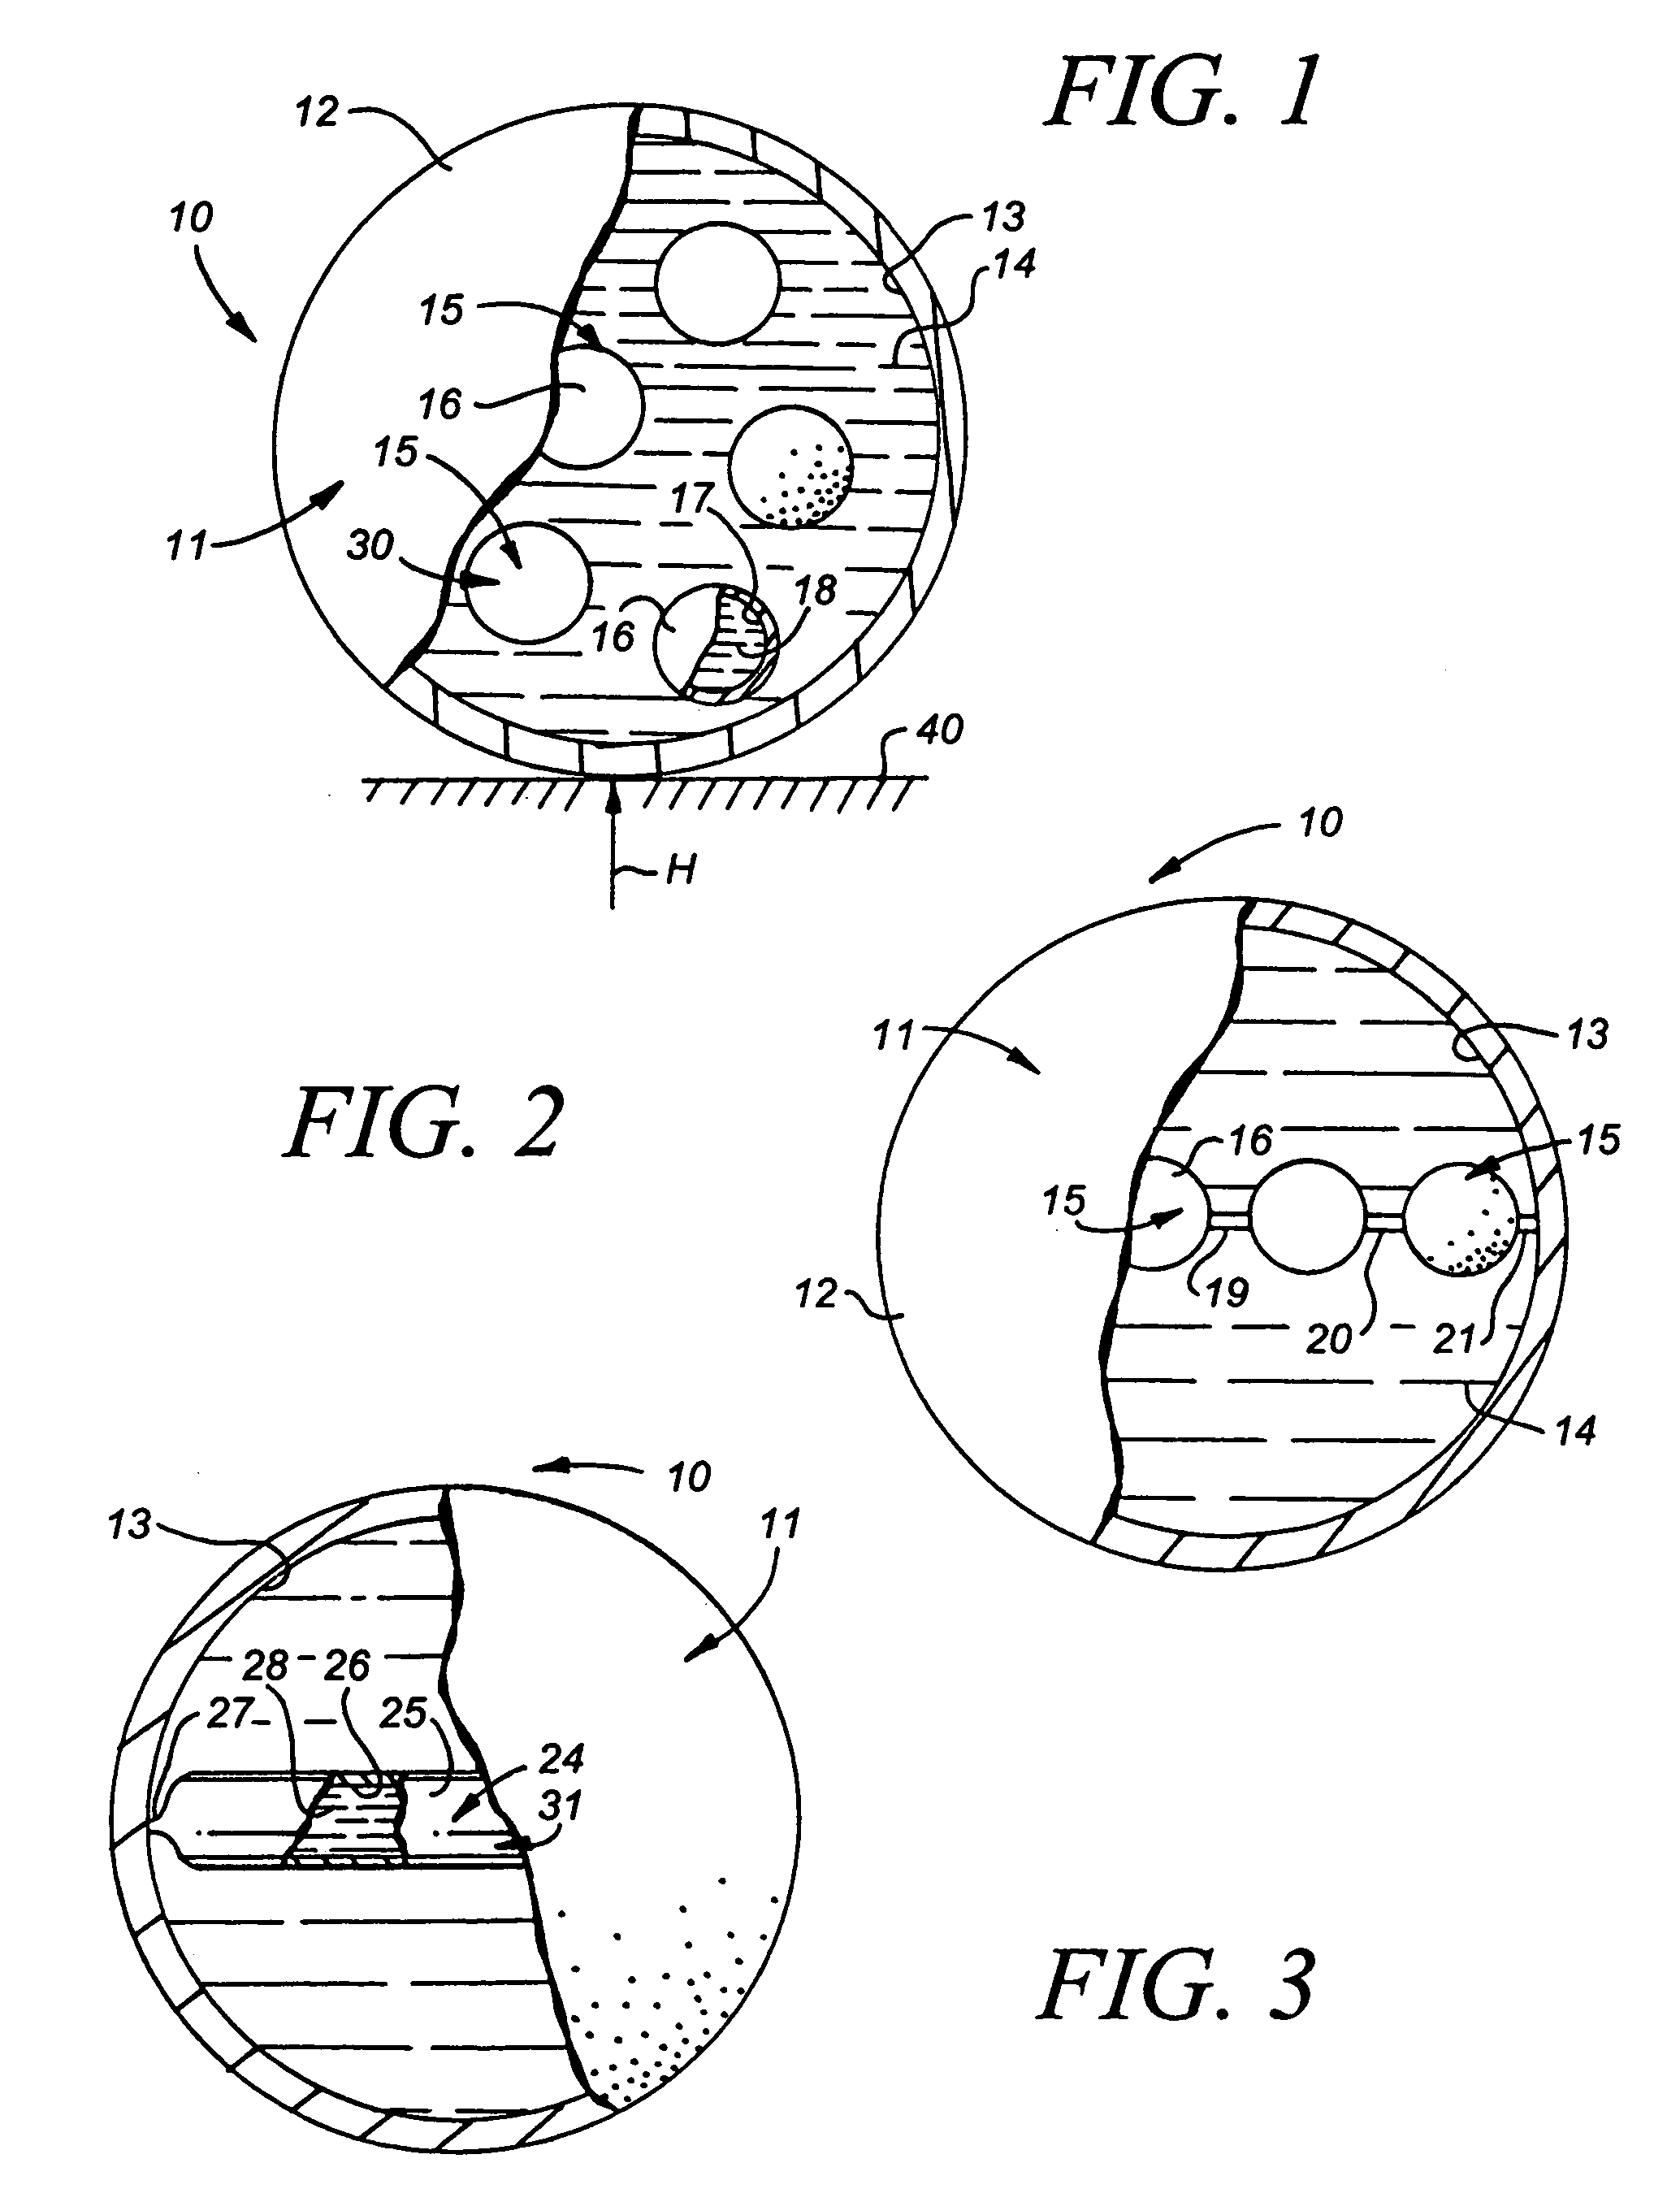 Thermally active convection apparatus